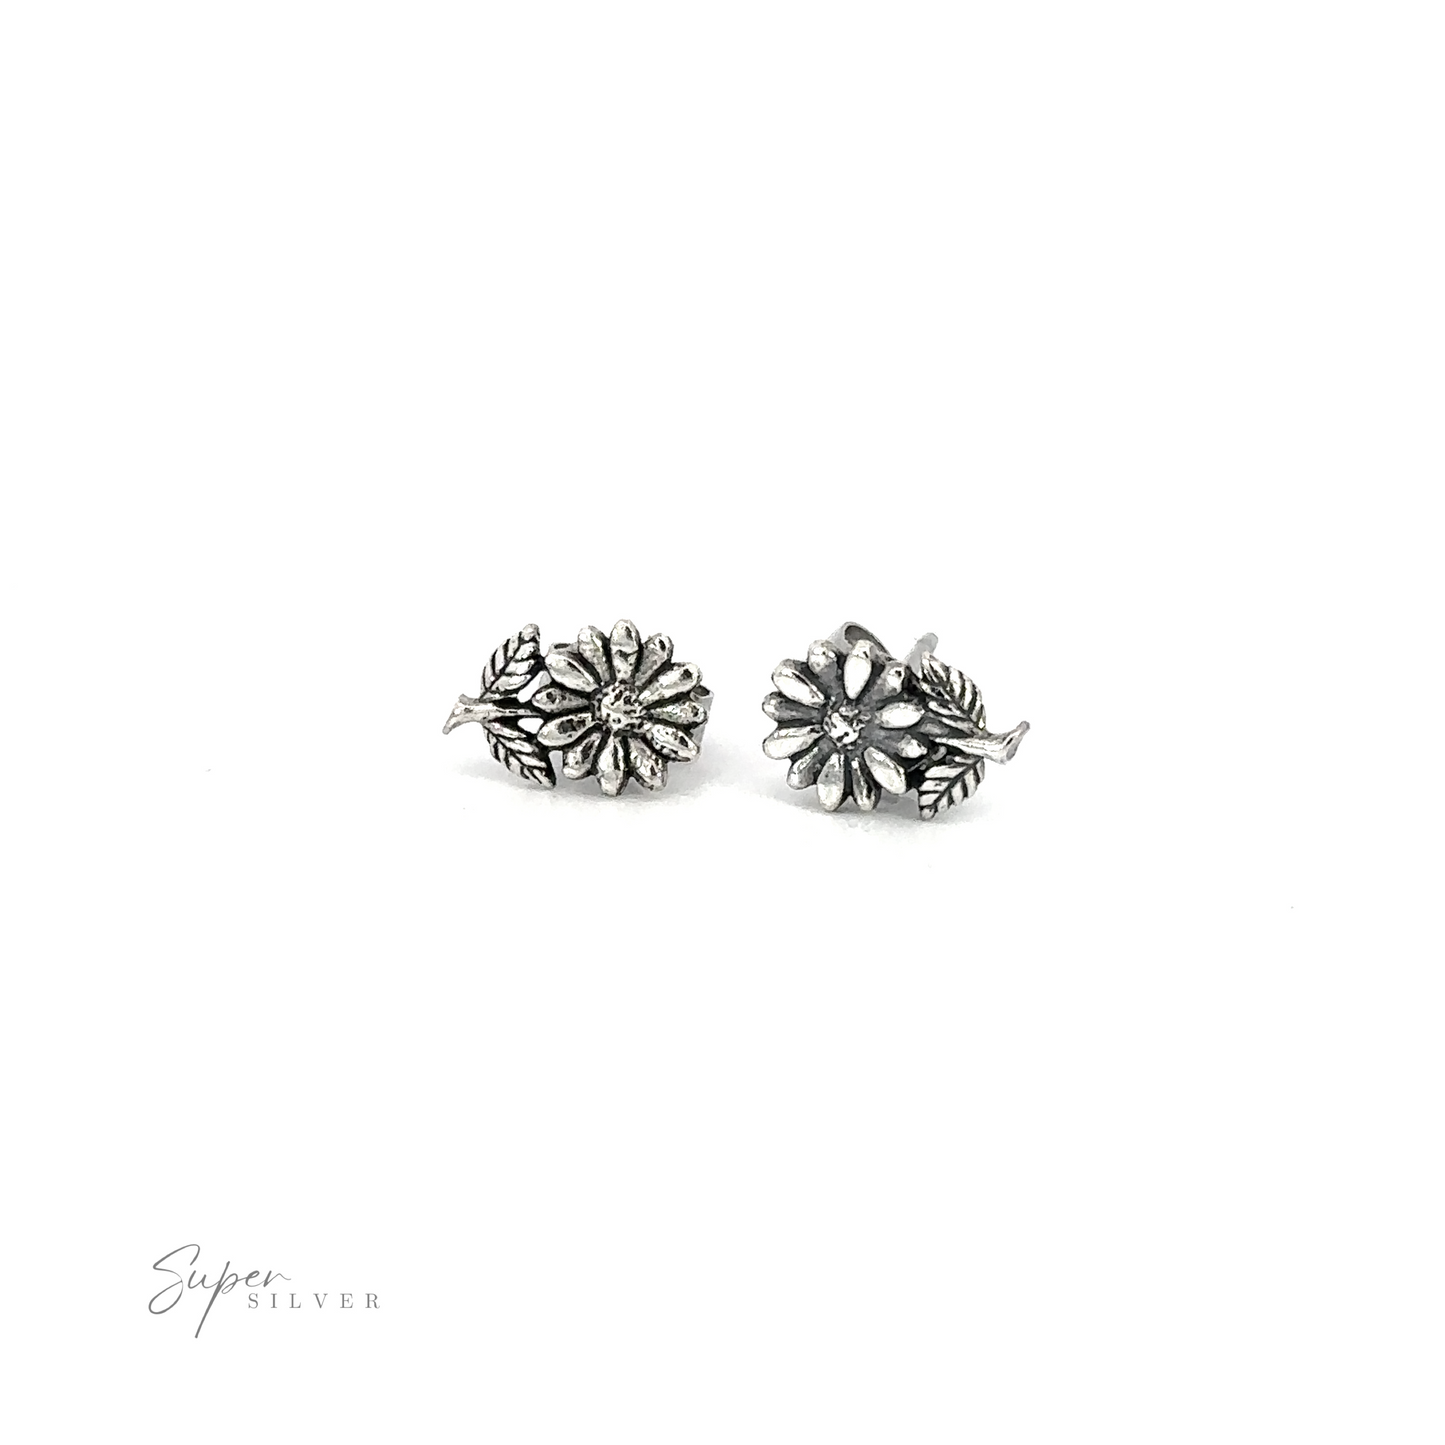 Introducing the stunning Daisy stud earrings from our floral delights jewelry collection. Crafted with exquisite attention to detail, these sterling silver studs are the perfect addition to any outfit. Elevate your style with our Daisy Studs.